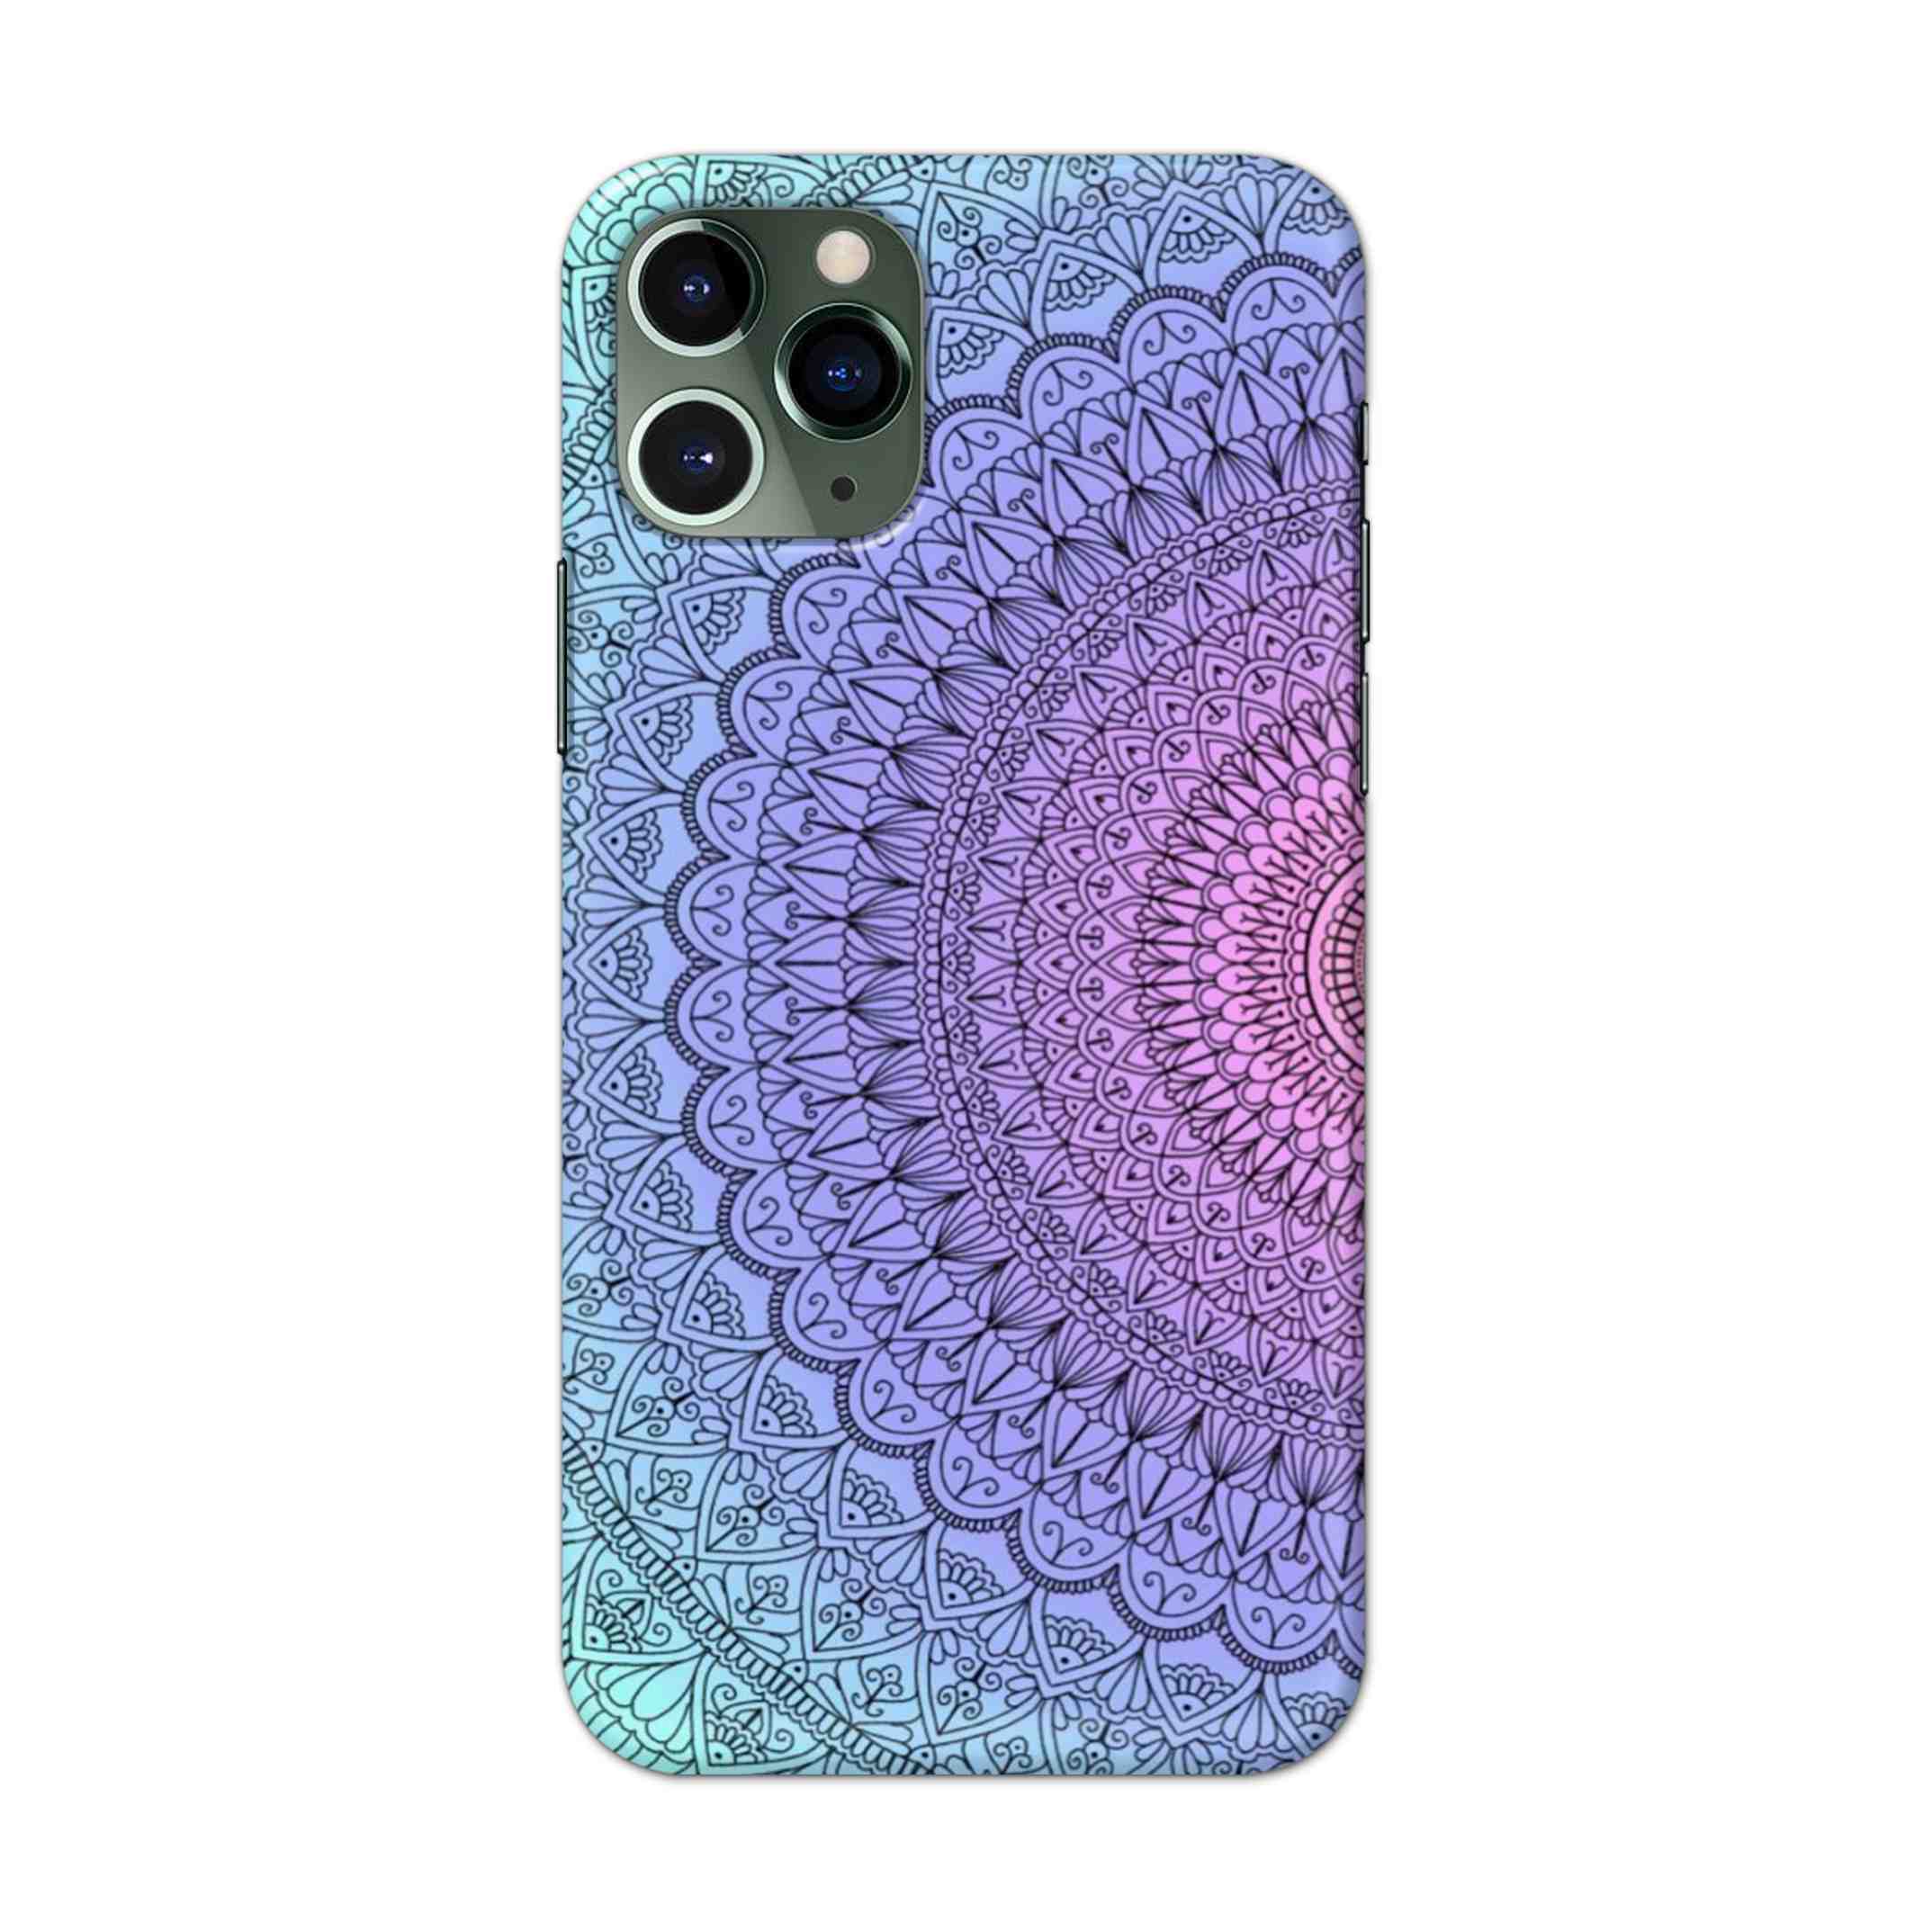 Buy Colourful Mandala Hard Back Mobile Phone Case/Cover For iPhone 11 Pro Online